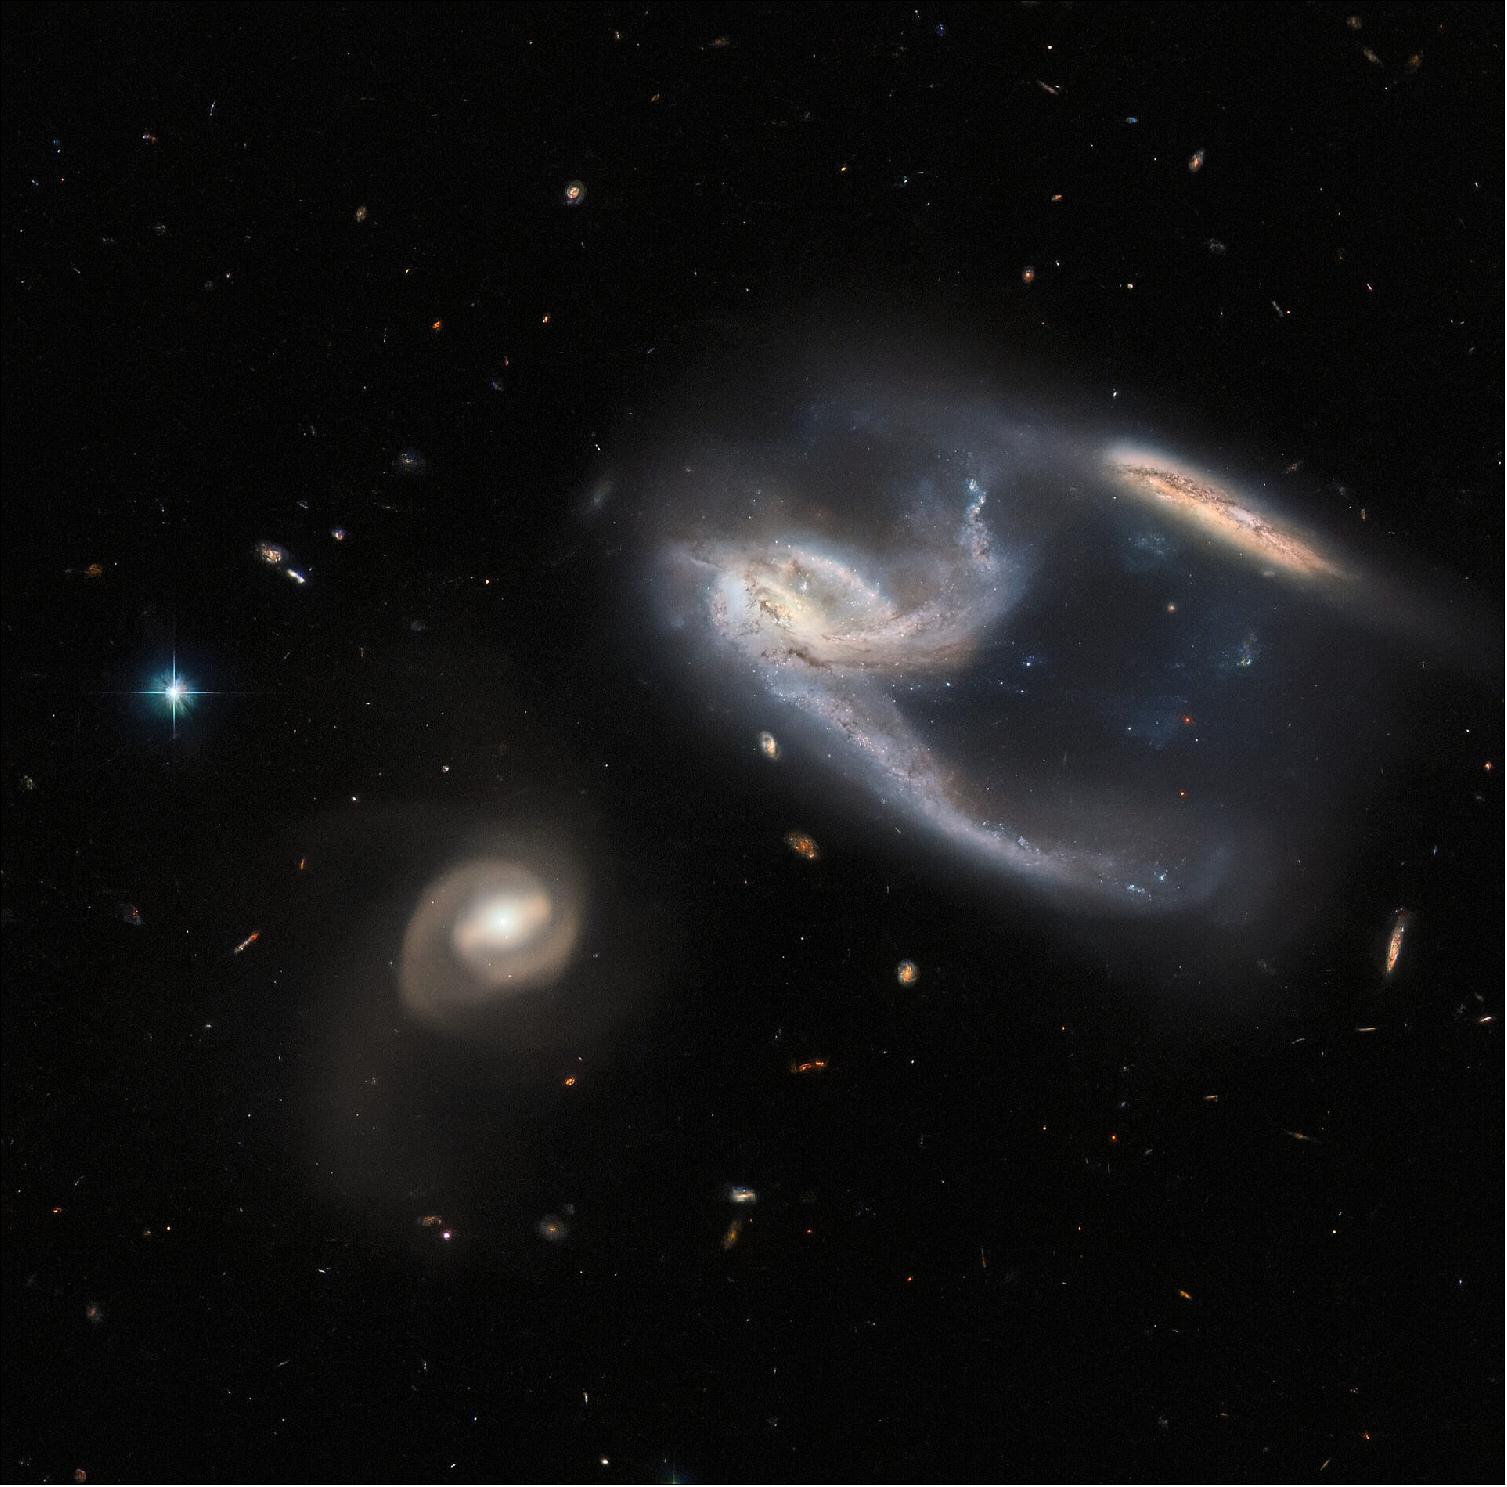 Figure 77: The subject of this image is a group of three galaxies, collectively known as NGC 7764A. They were imaged by the NASA/ESA Hubble Space Telescope, using both its Advanced Camera for Surveys (ACS) and Wide Field Camera 3 (WFC3). The two galaxies in the upper right of the image appear to be interacting with one another — indeed, the long trails of stars and gas extending from them both give the impression that they have both just been struck at great speed, thrown into disarray by the bowling-ball-shaped galaxy to the lower left of the image. In reality, however, interactions between galaxies happen over very long time periods, and galaxies rarely collide head-on with one another. It is also unclear whether the galaxy to the lower left is actually interacting with the other two, although they are so relatively close in space that it seems possible that they are. By happy coincidence, the collective interaction between these galaxies have caused the two on the upper right to form a shape, which from our Solar System's perspective, ressembles the starship known as the USS Enterprise from Star Trek! (image credit: ESA/Hubble & NASA, J. Dalcanton, Dark Energy Survey, DOE, FNAL, DECam, CTIO, NOIRLab/NSF/AURA, ESO; CC BY 4.0 Acknowledgement: J. Schmidt)